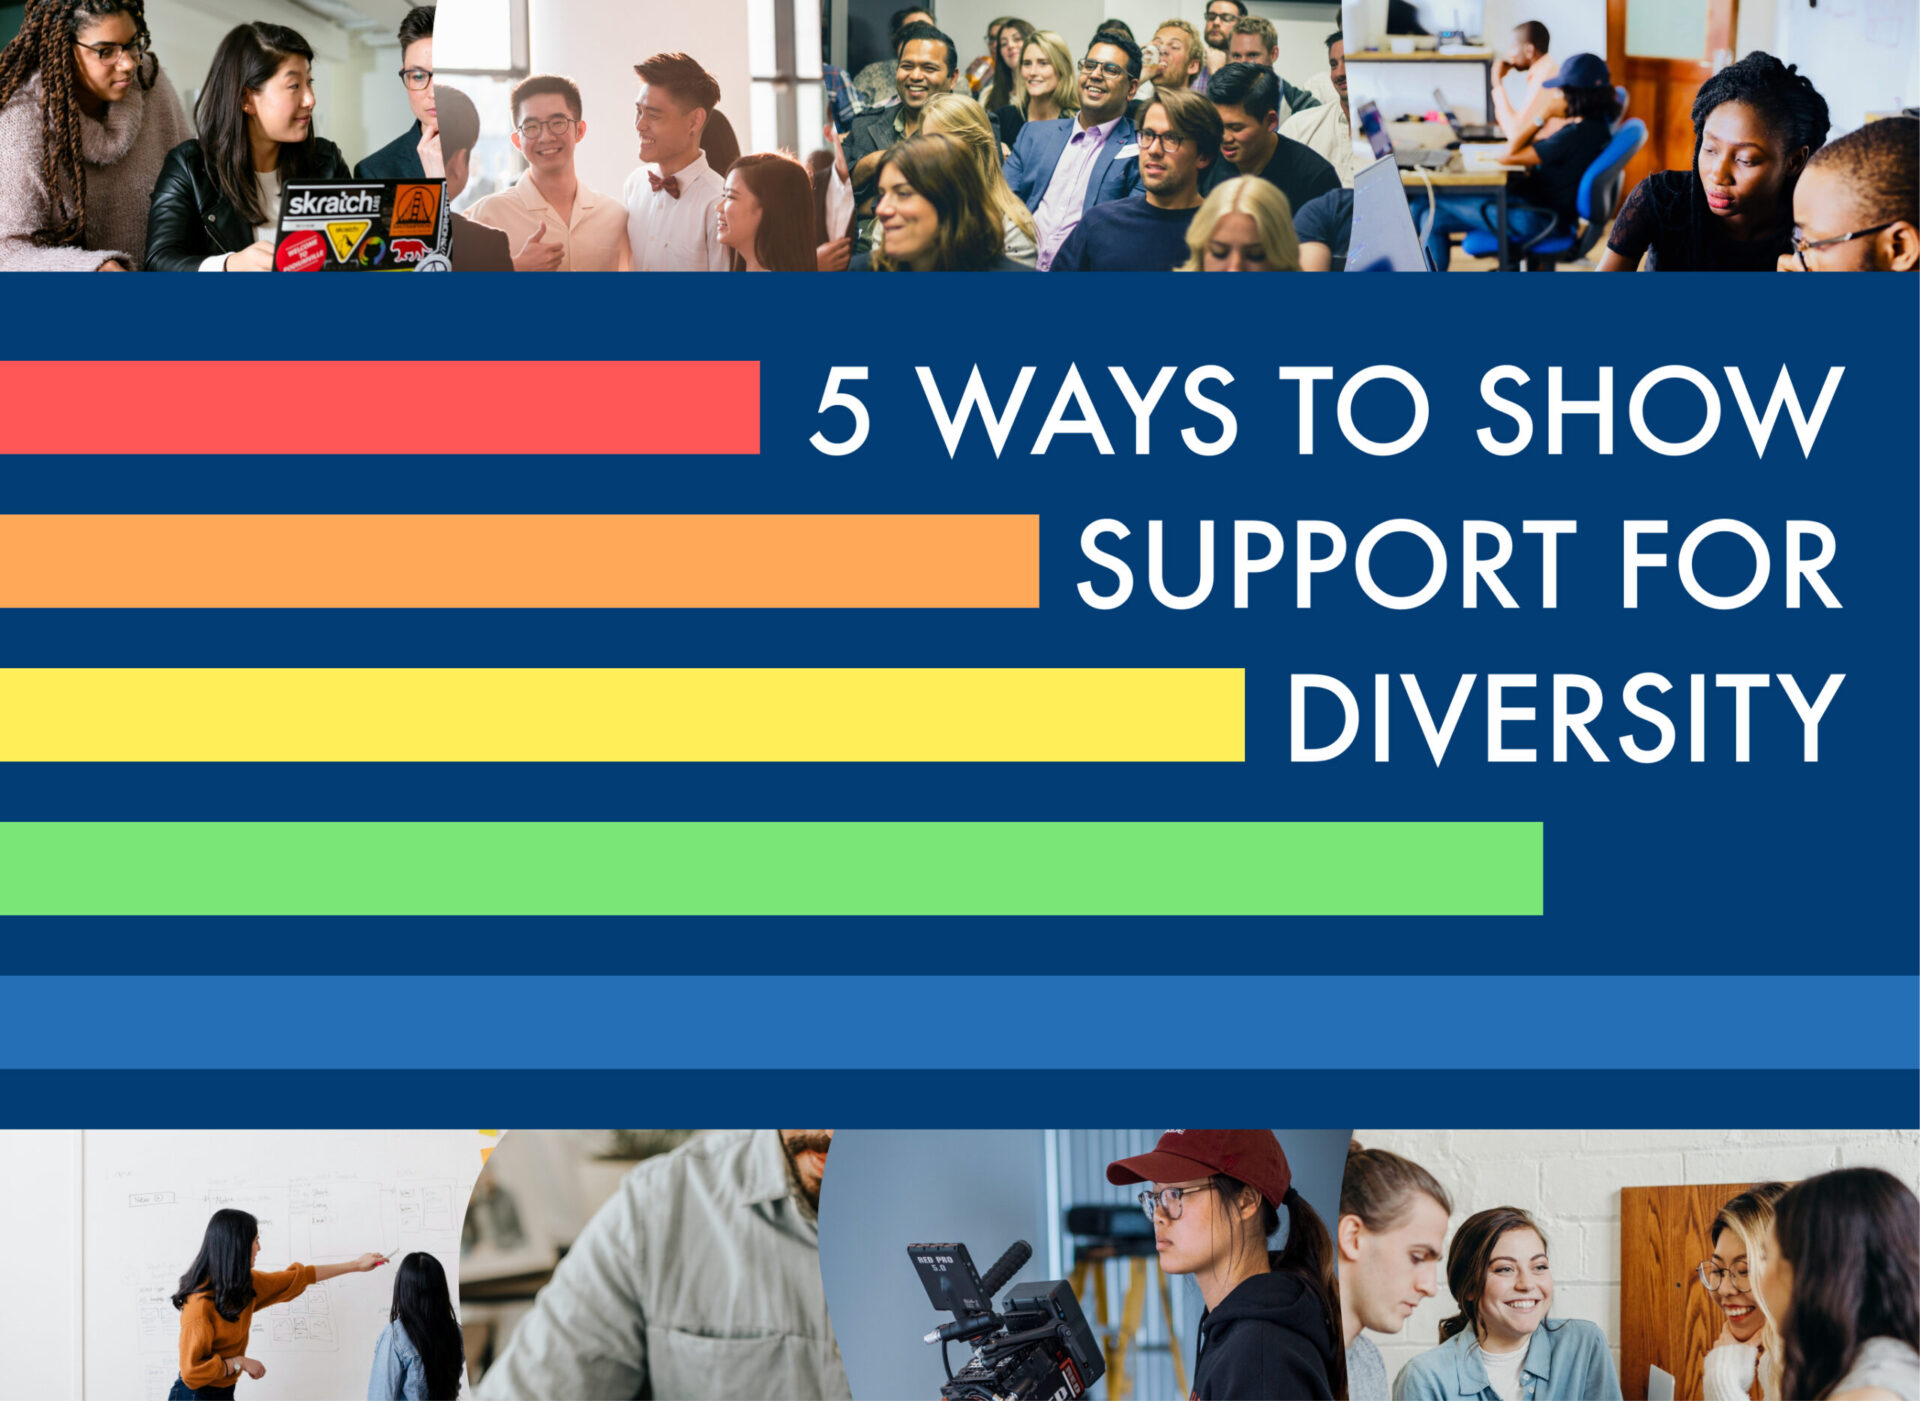 5 Ways to Show Support for Diversity